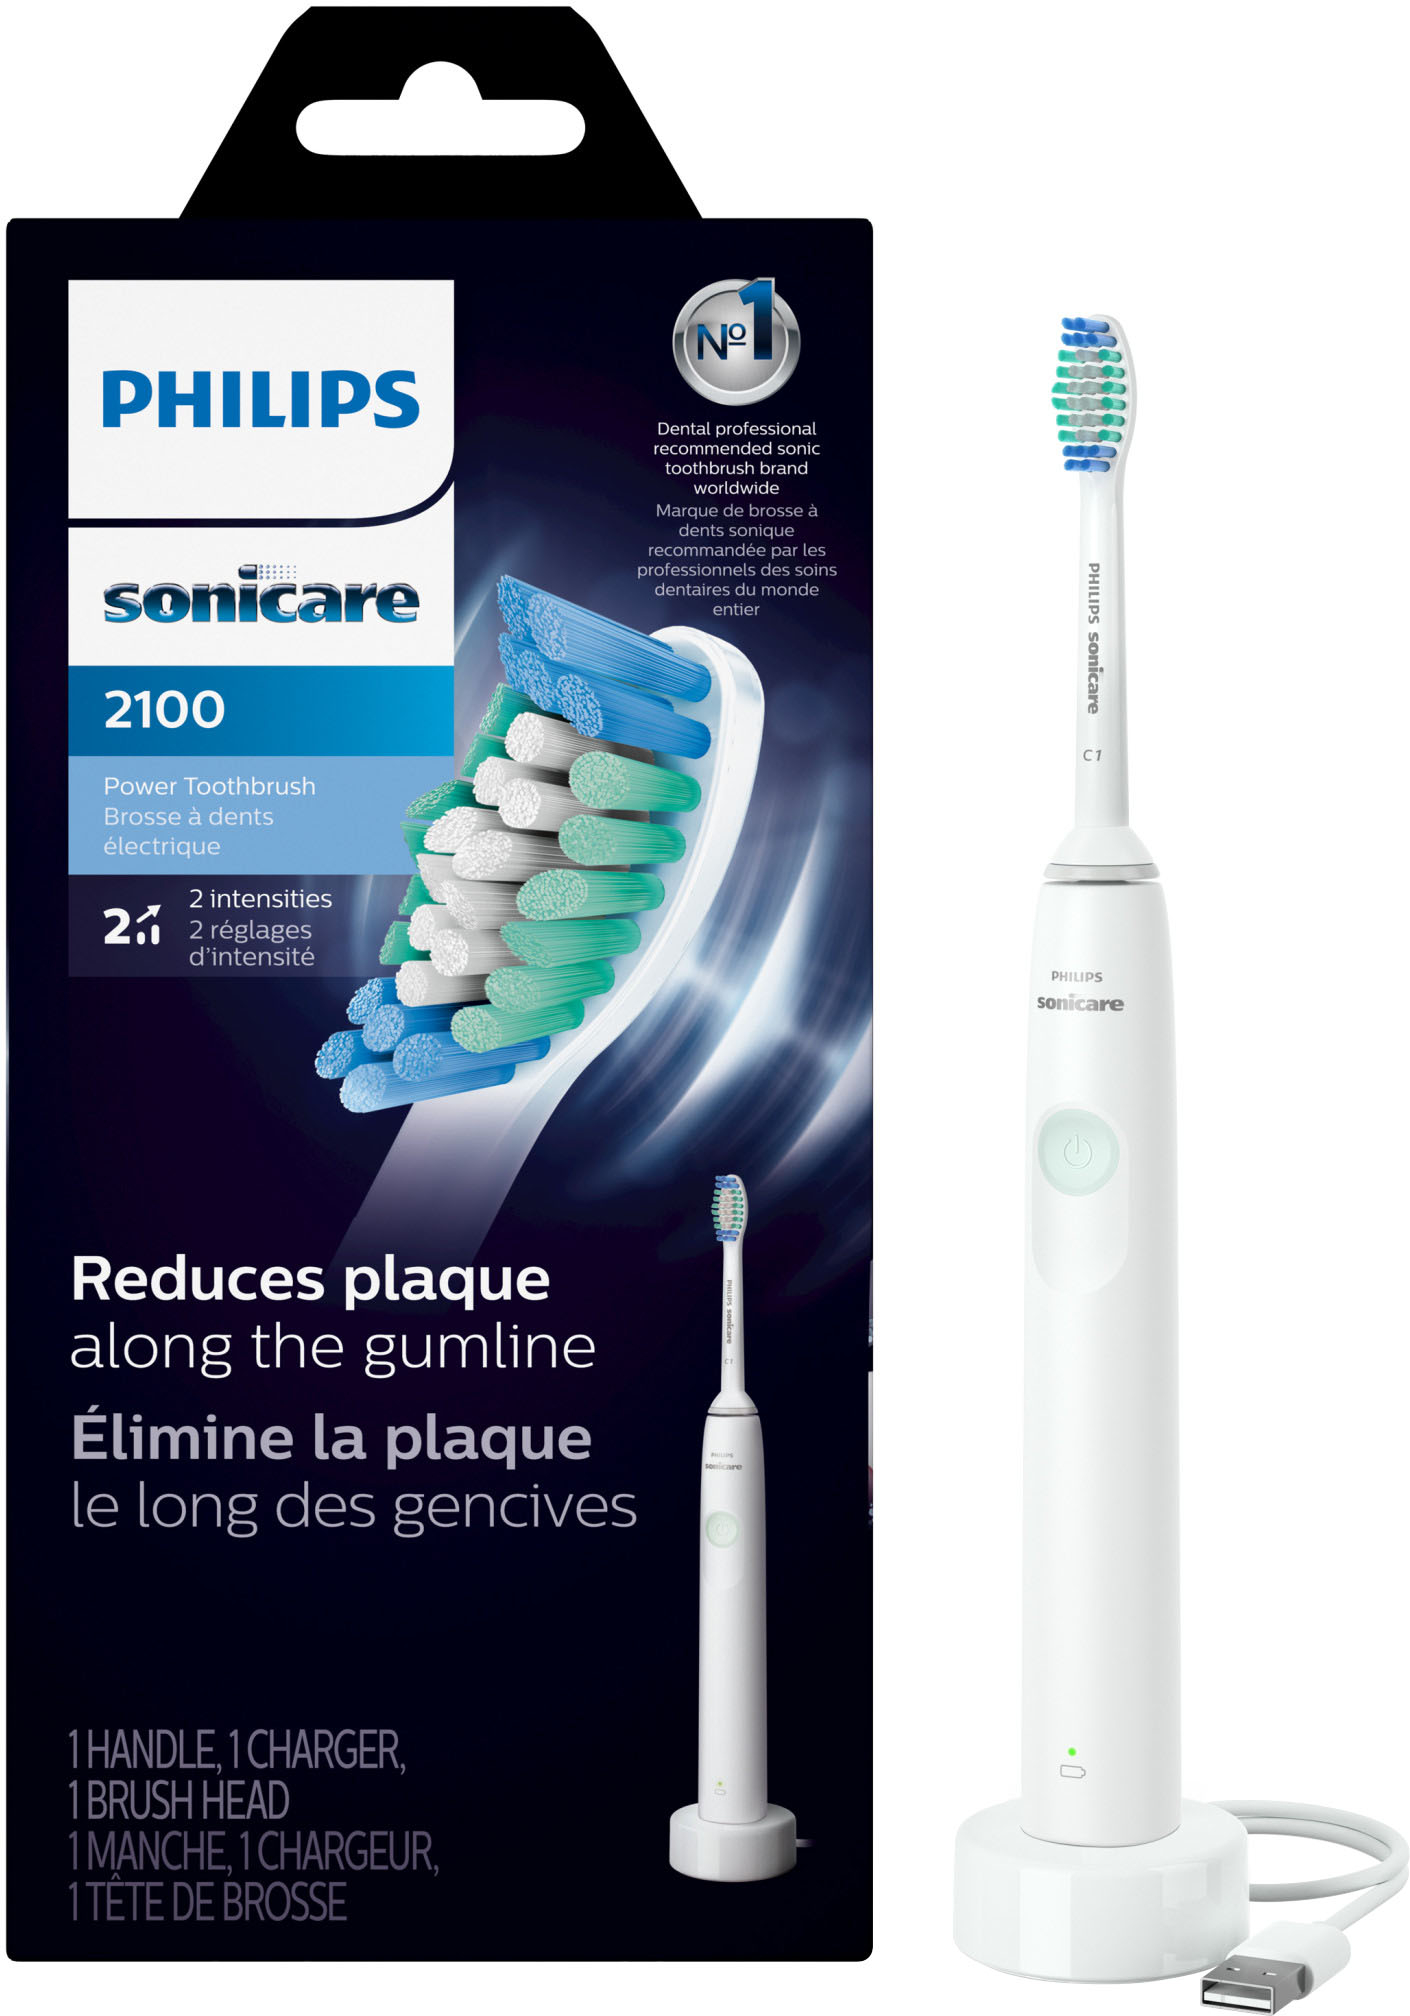 Philips Sonicare HX3661/04 2100 Power Toothbrush, Rechargeable Electric